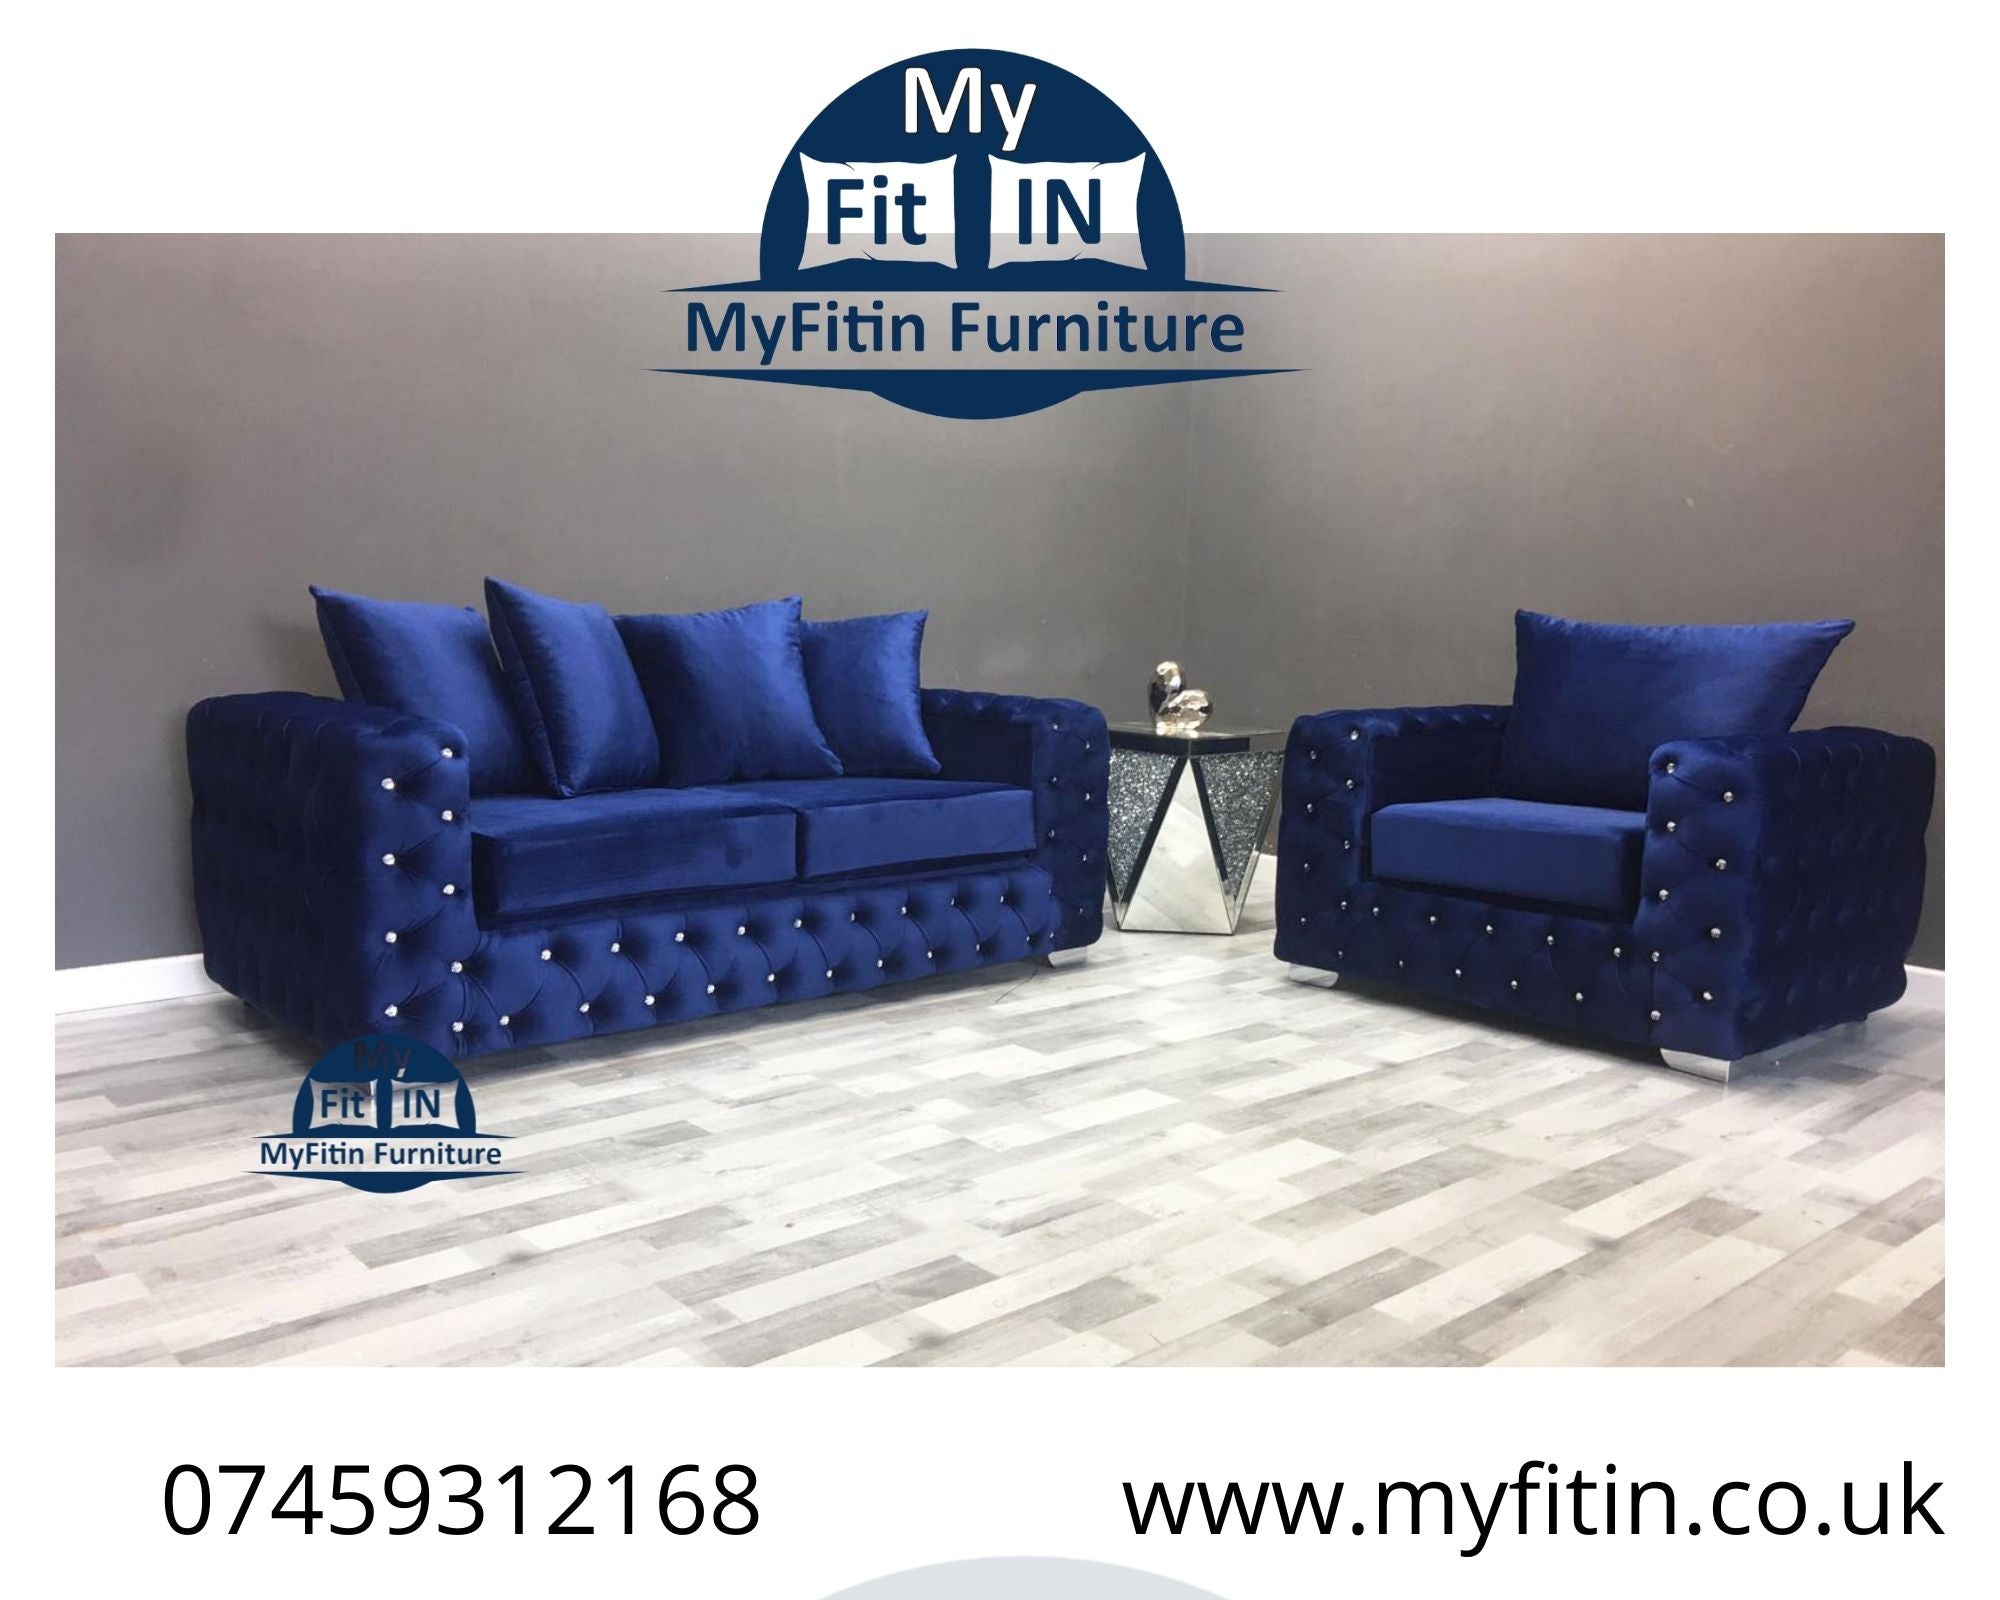 Ashton Sofas in different colours and sizes